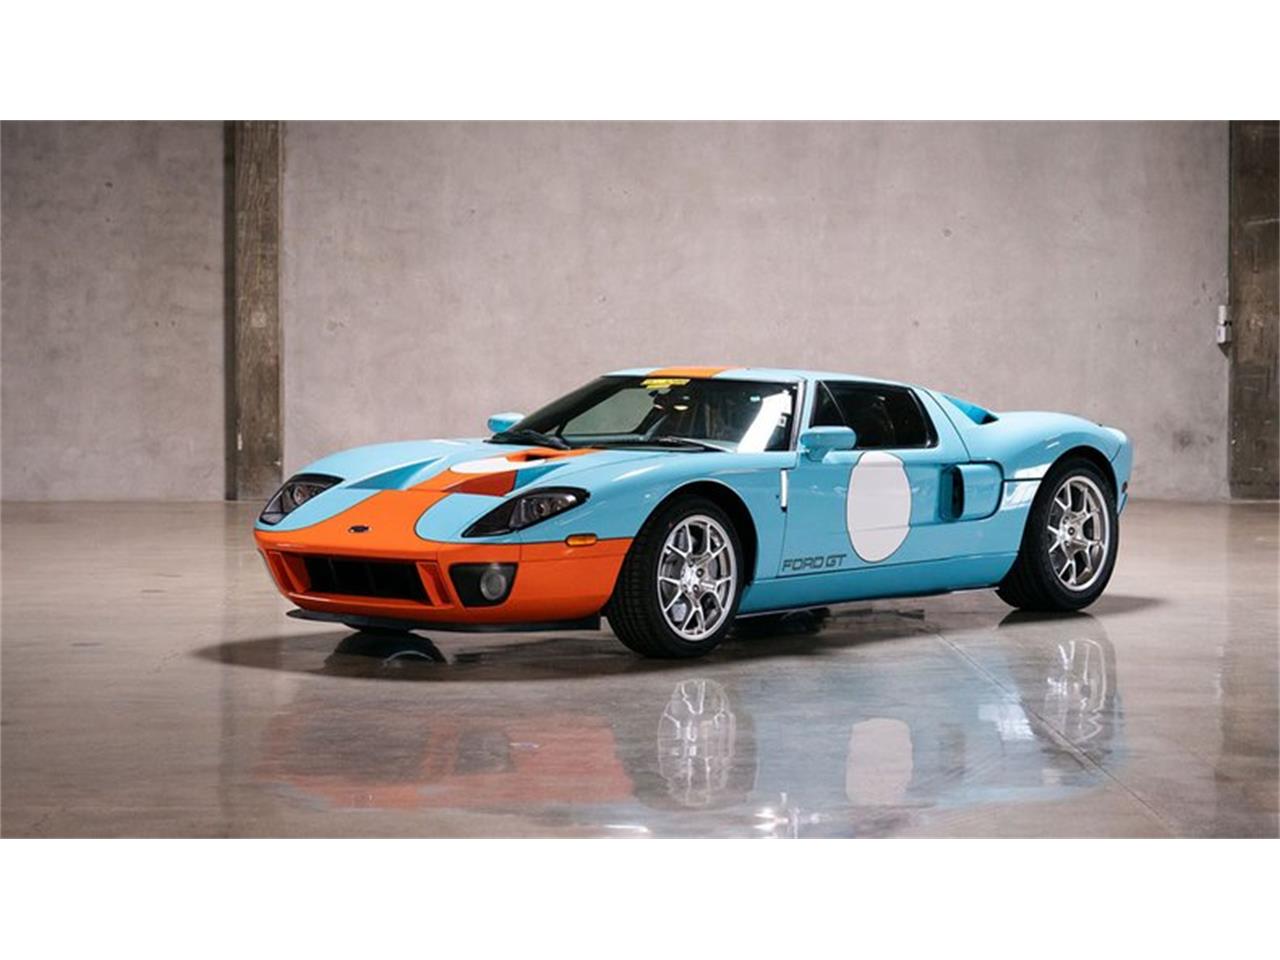 For Sale at Auction: 2006 Ford GT in Monterey, California for sale in Monterey, CA